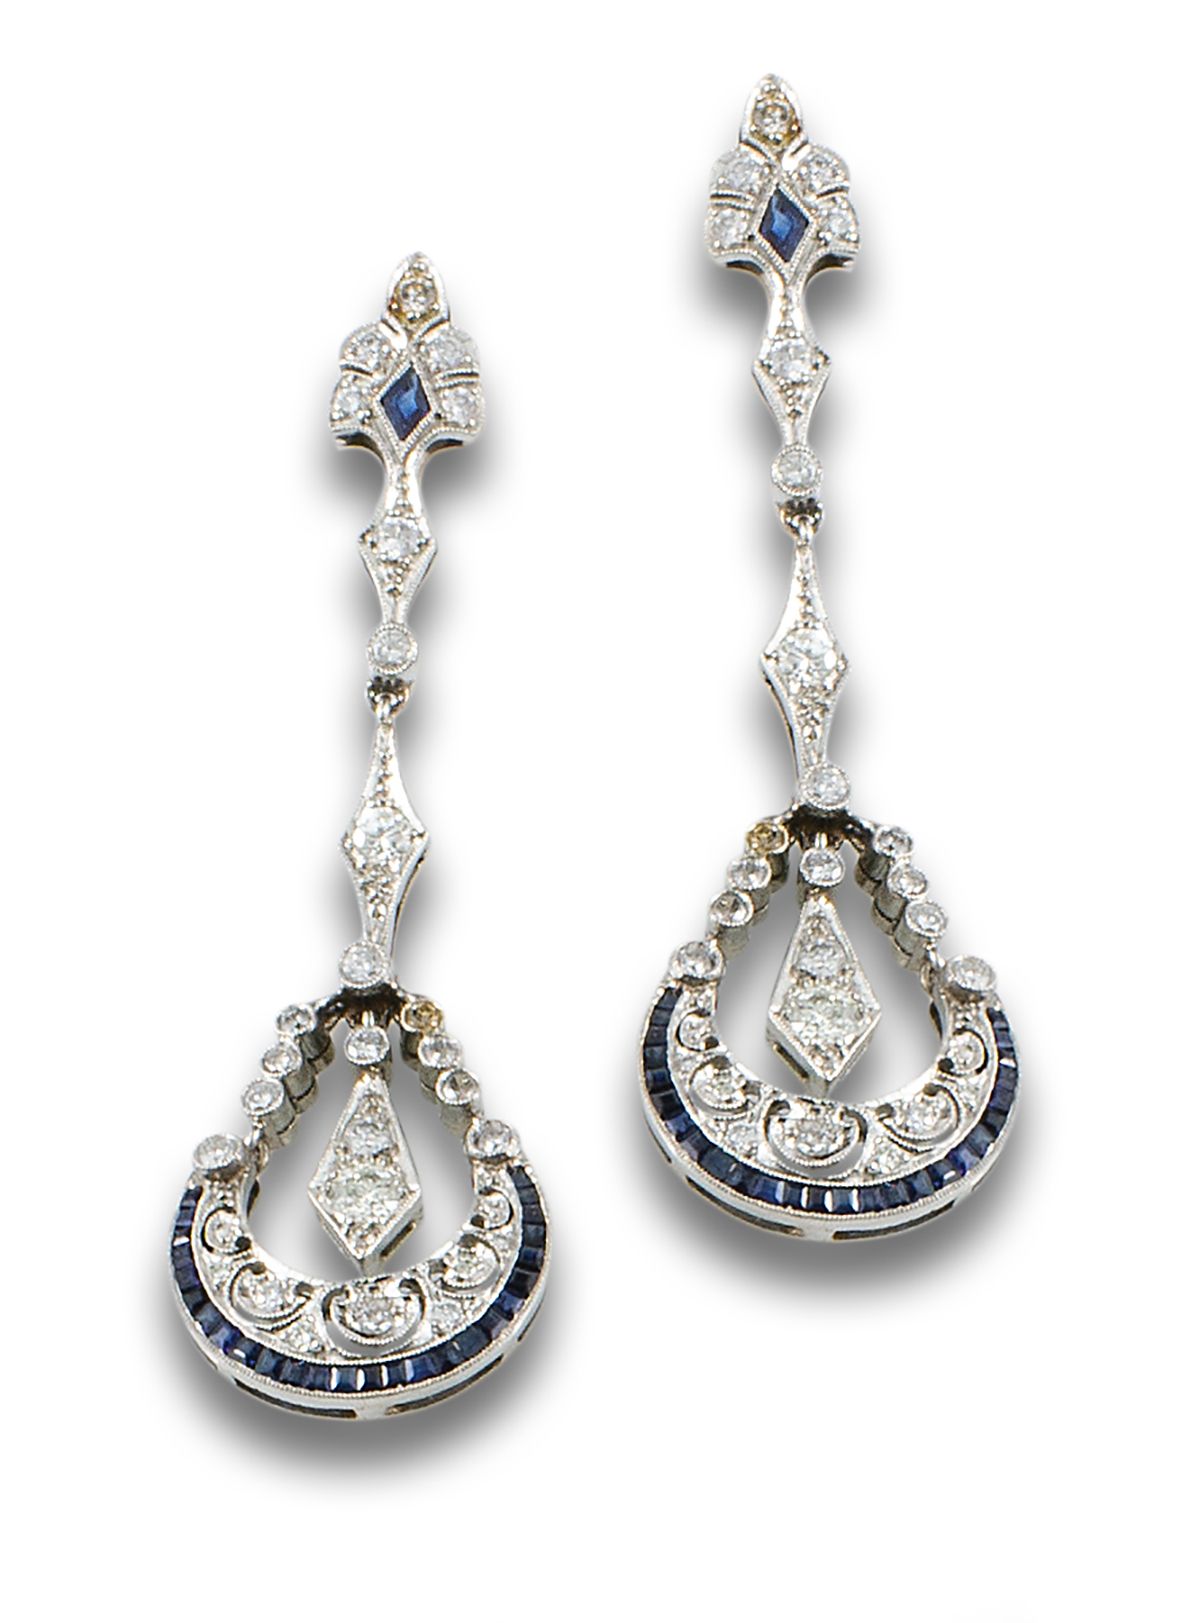 Long earrings, old style, platinum. Made up of diamonds, brilliant cut and calib&hellip;